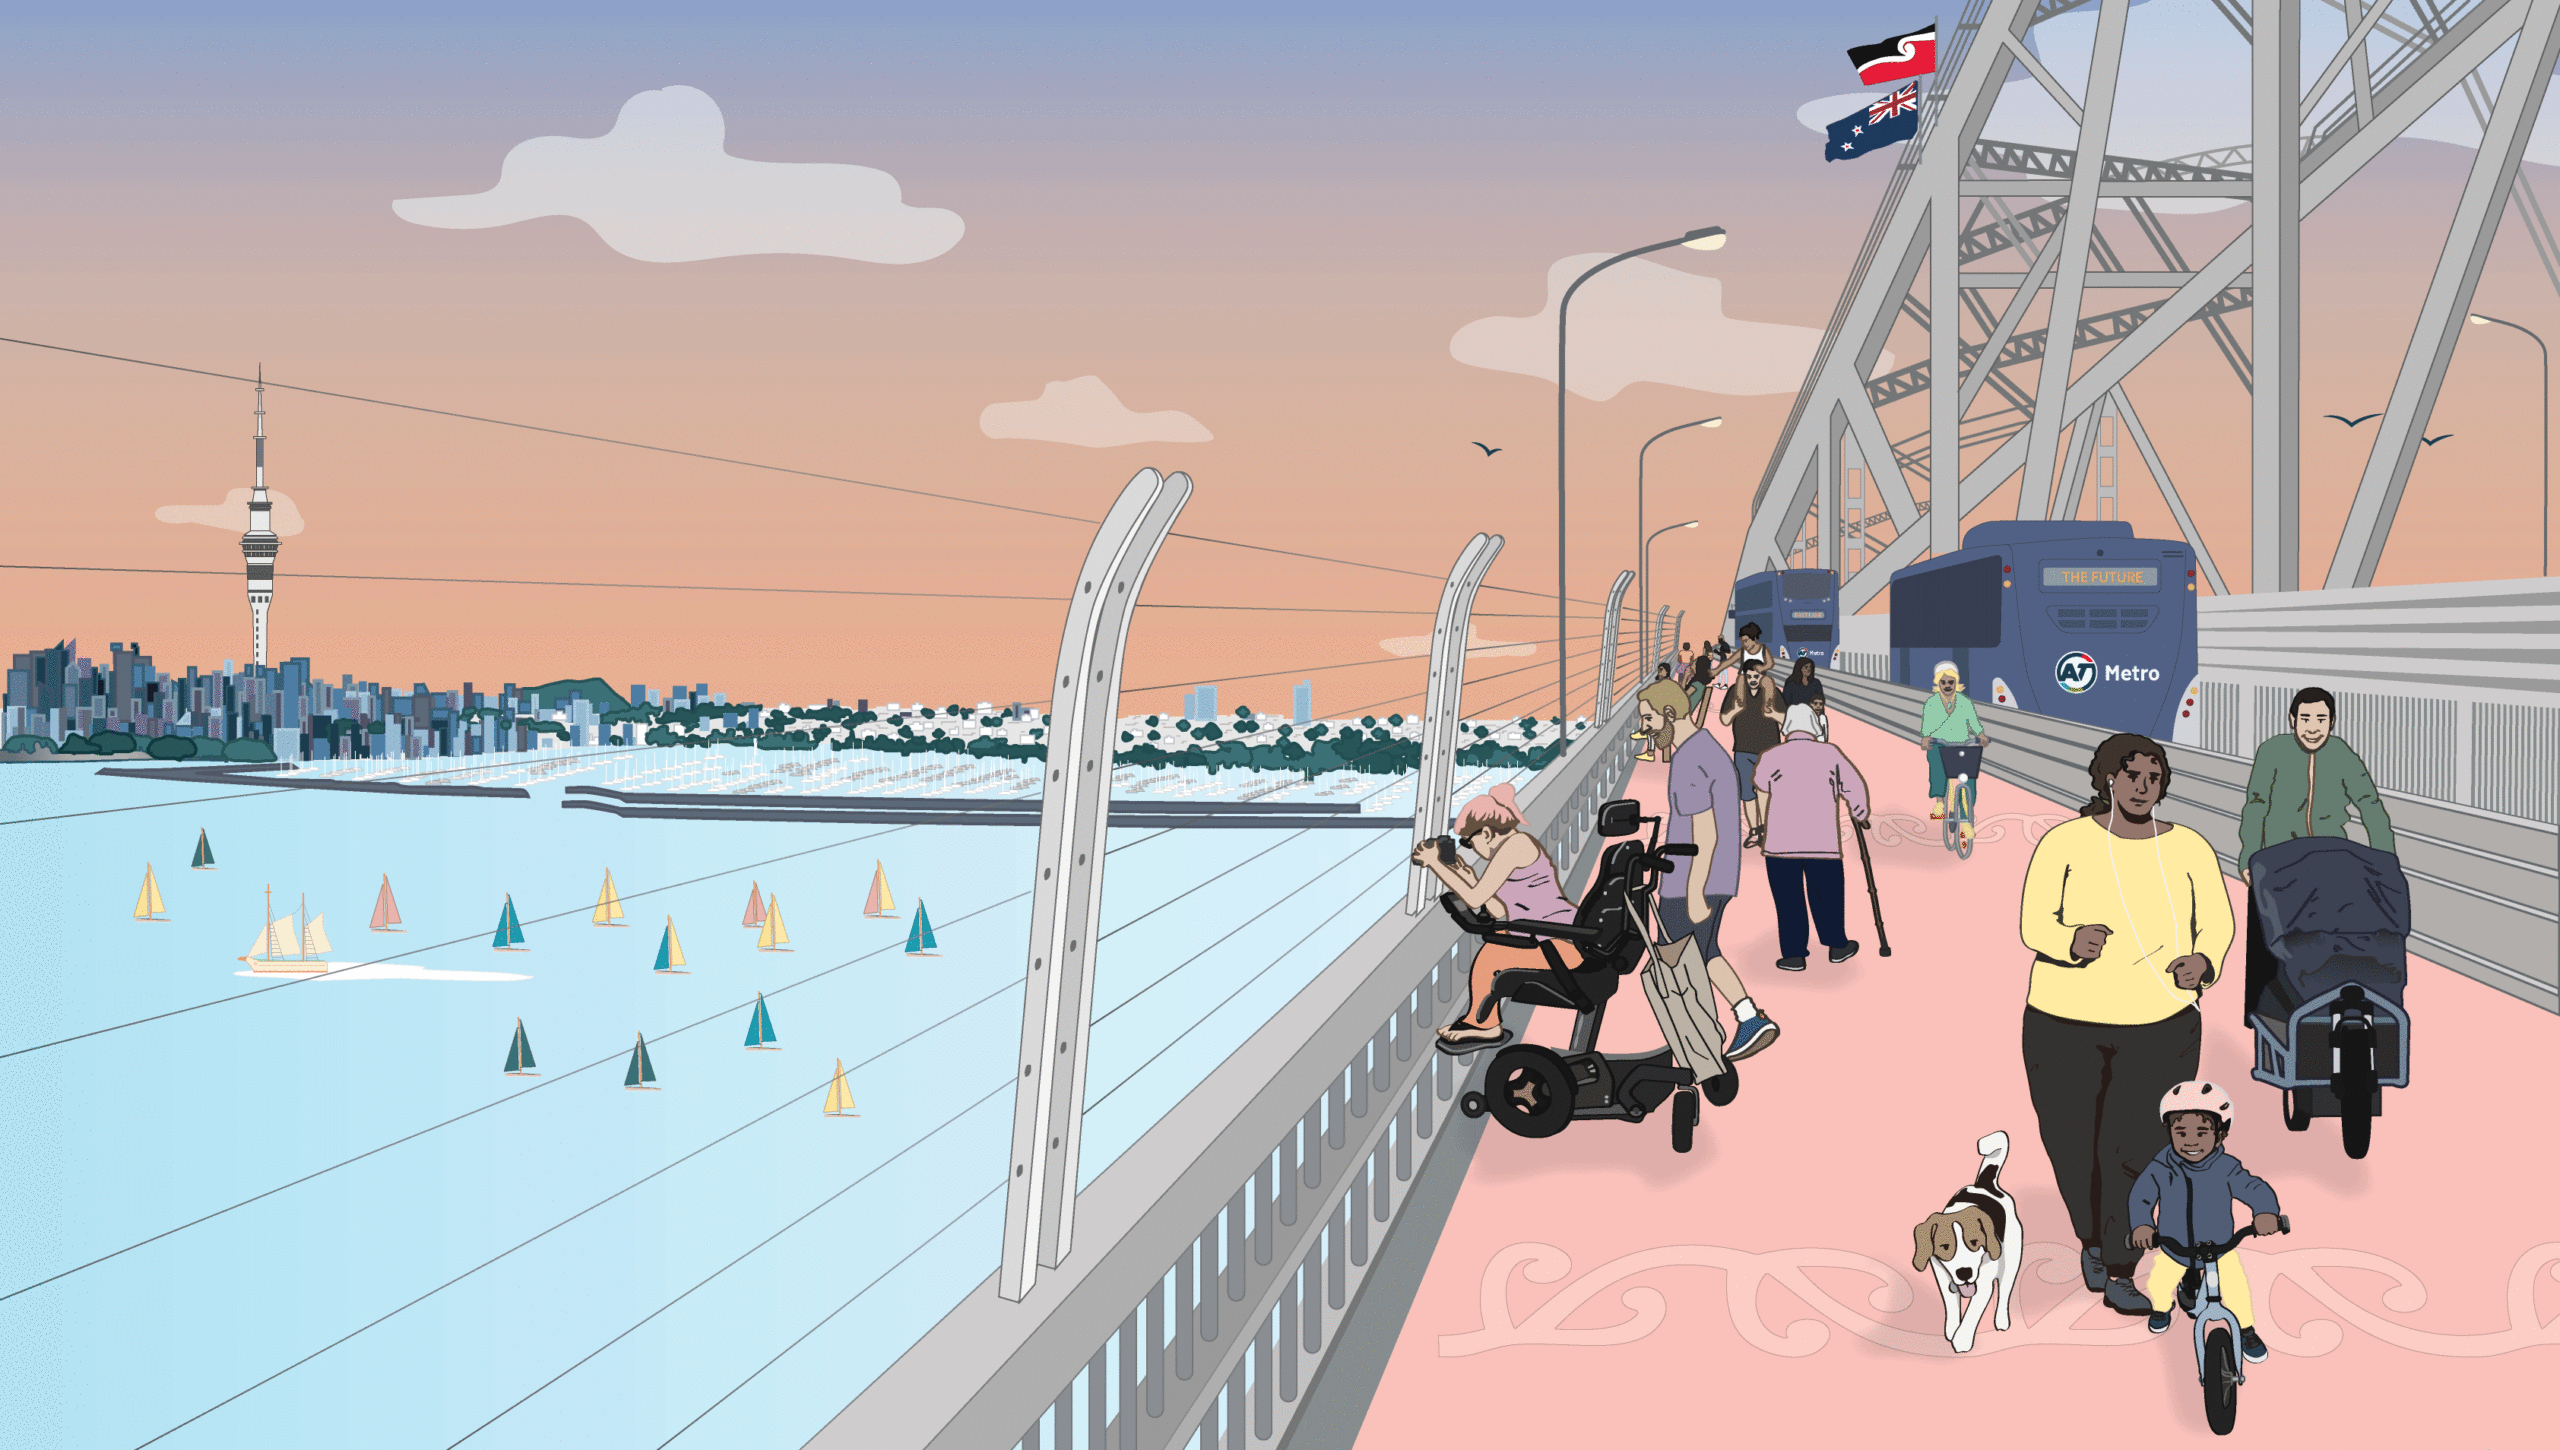 mage shows a shared path for walking and cycling on Auckland's Harbour Bridge, with a diverse array of people using it in different ways. There is a beautiful view beyond of the city including the Skytower.